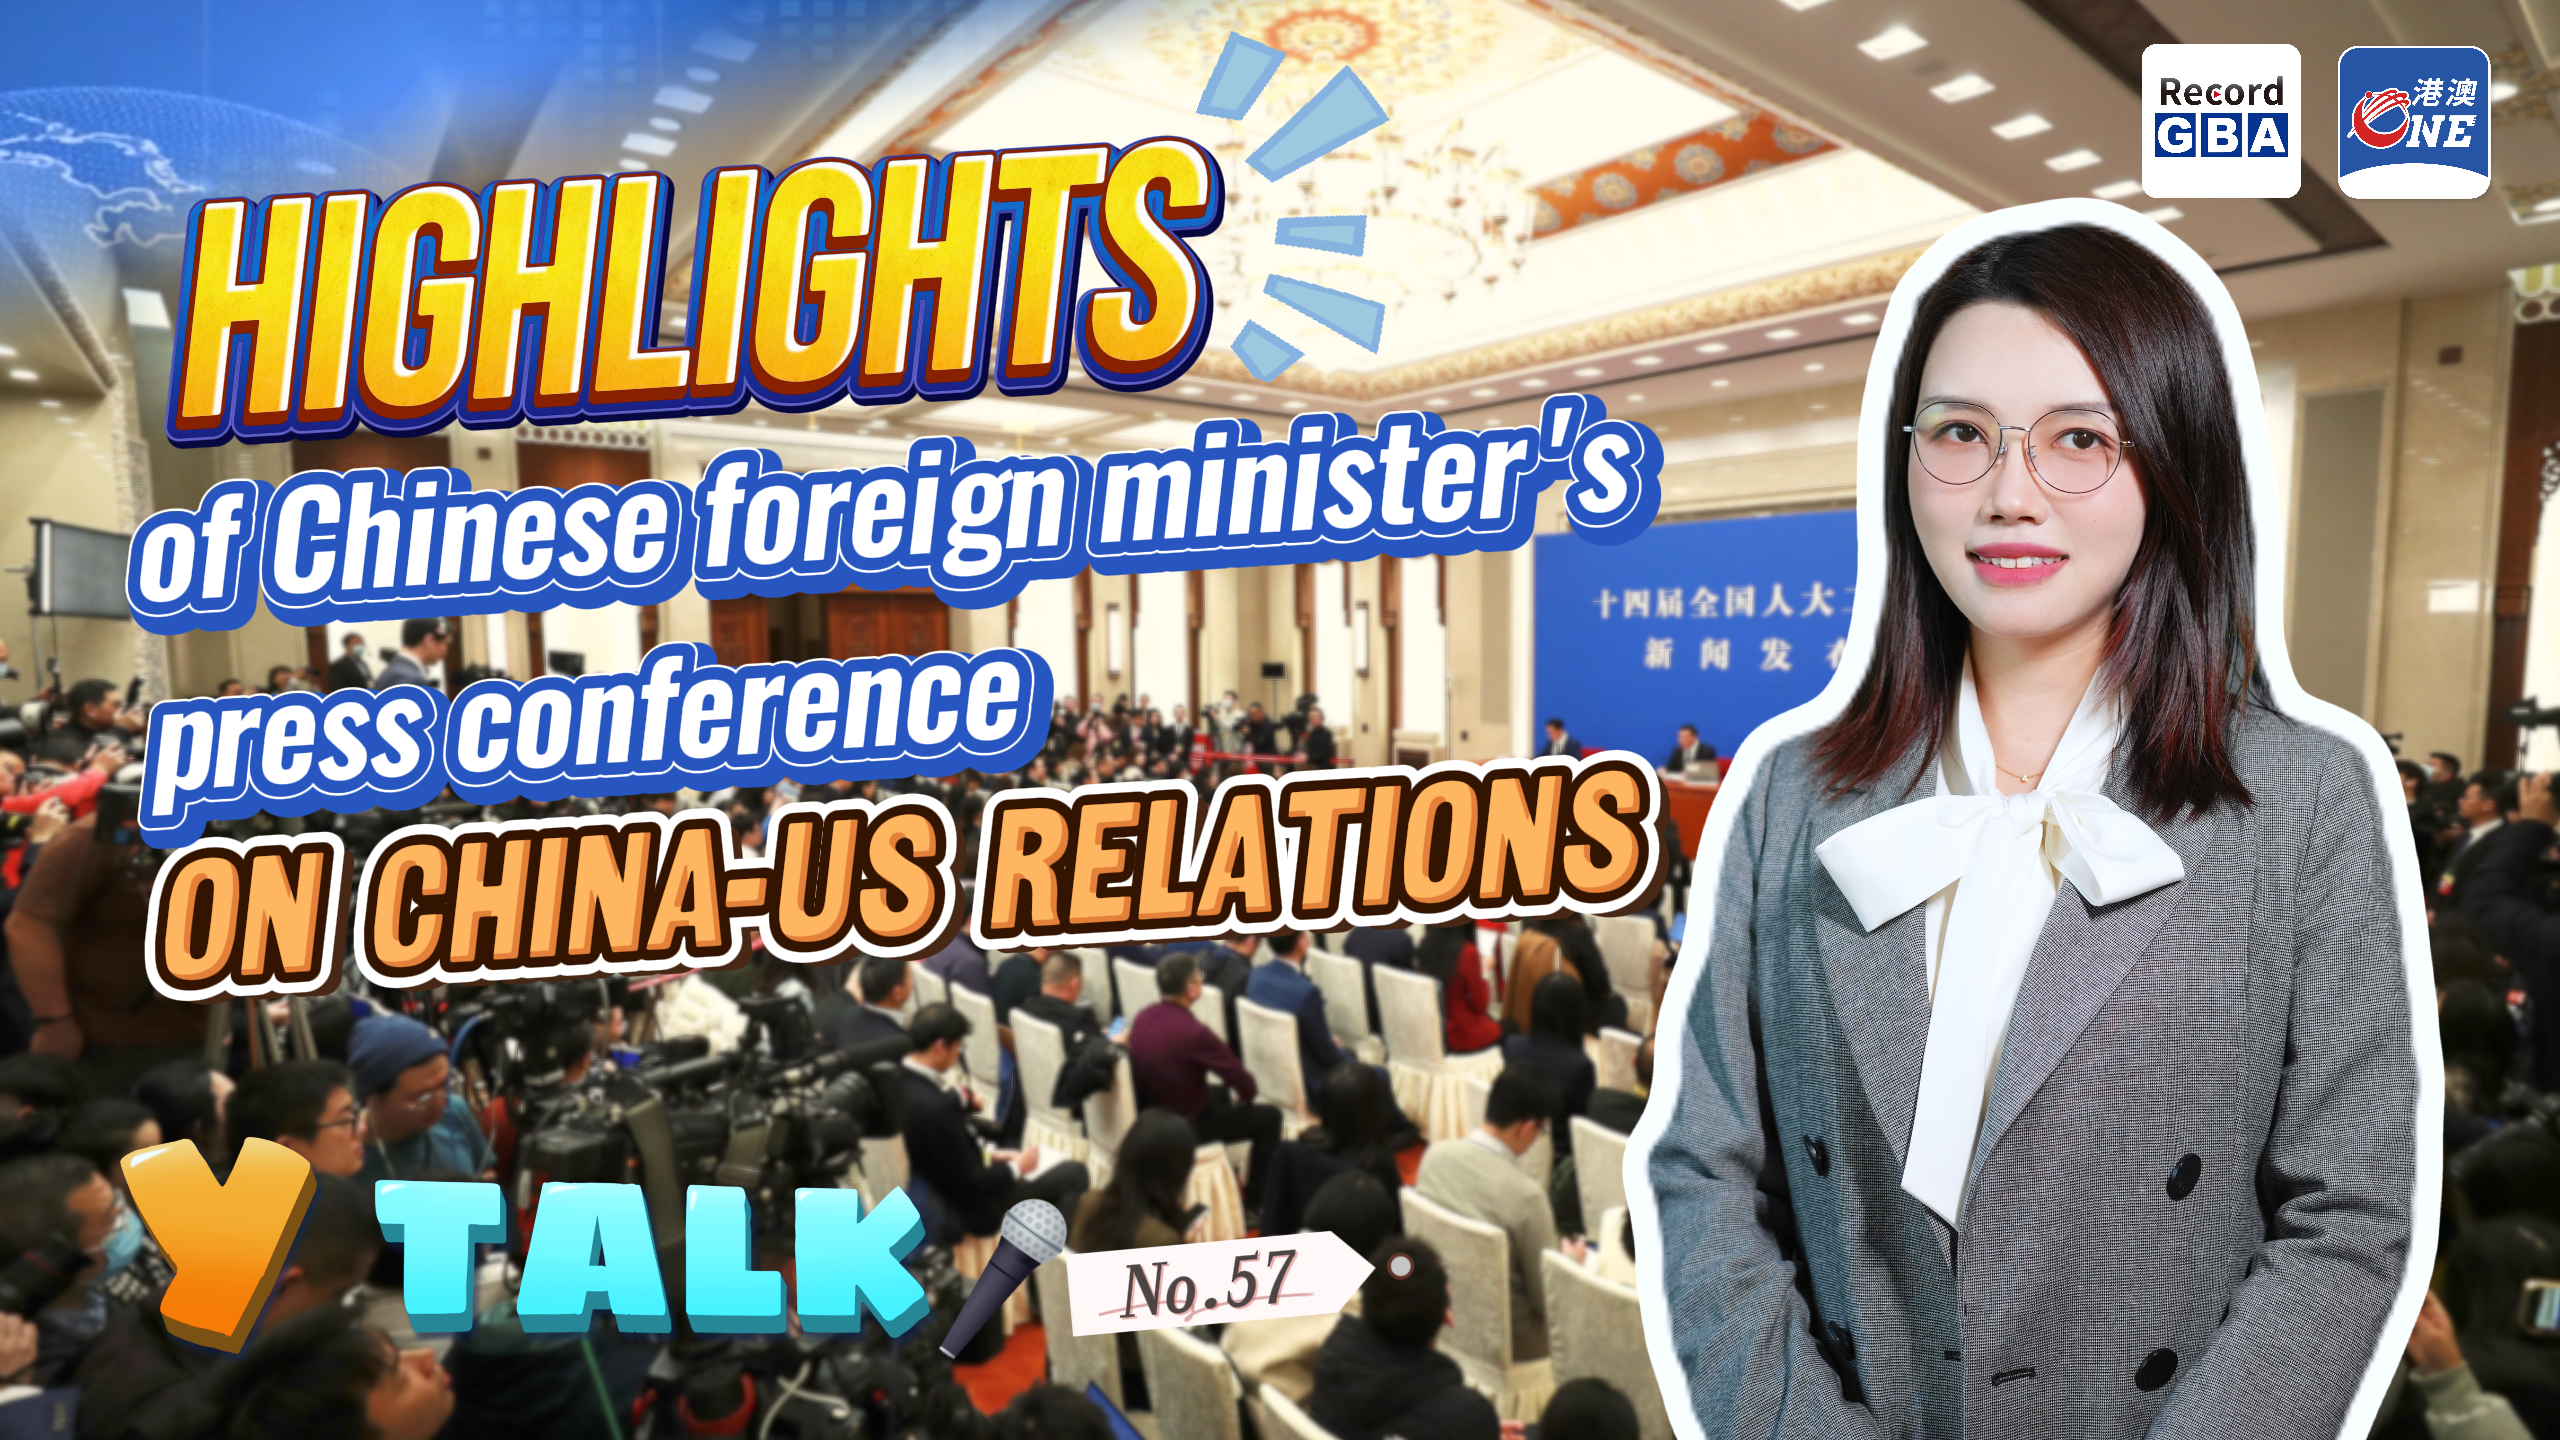 Y Talk｜Highlights of Chinese Foreign Minister's Press Conference on China-US relations关于中美关系，外长记者会释放了哪些信号？